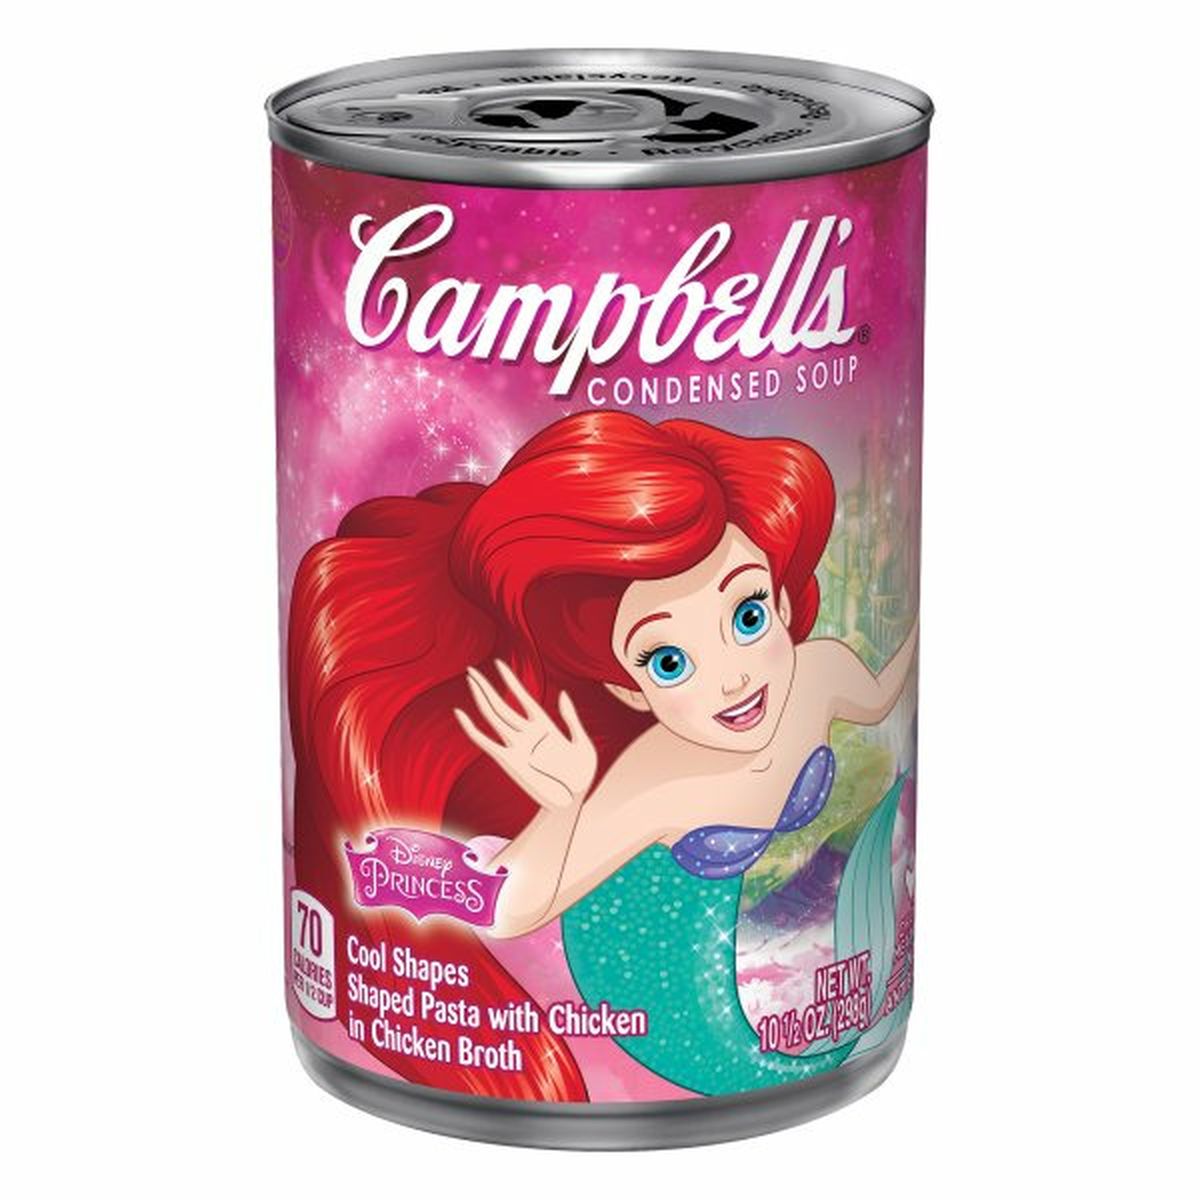 Calories in Campbell'ss Soup, Condensed, Shaped Pasta with Chicken in Chicken Broth, Disney Princess